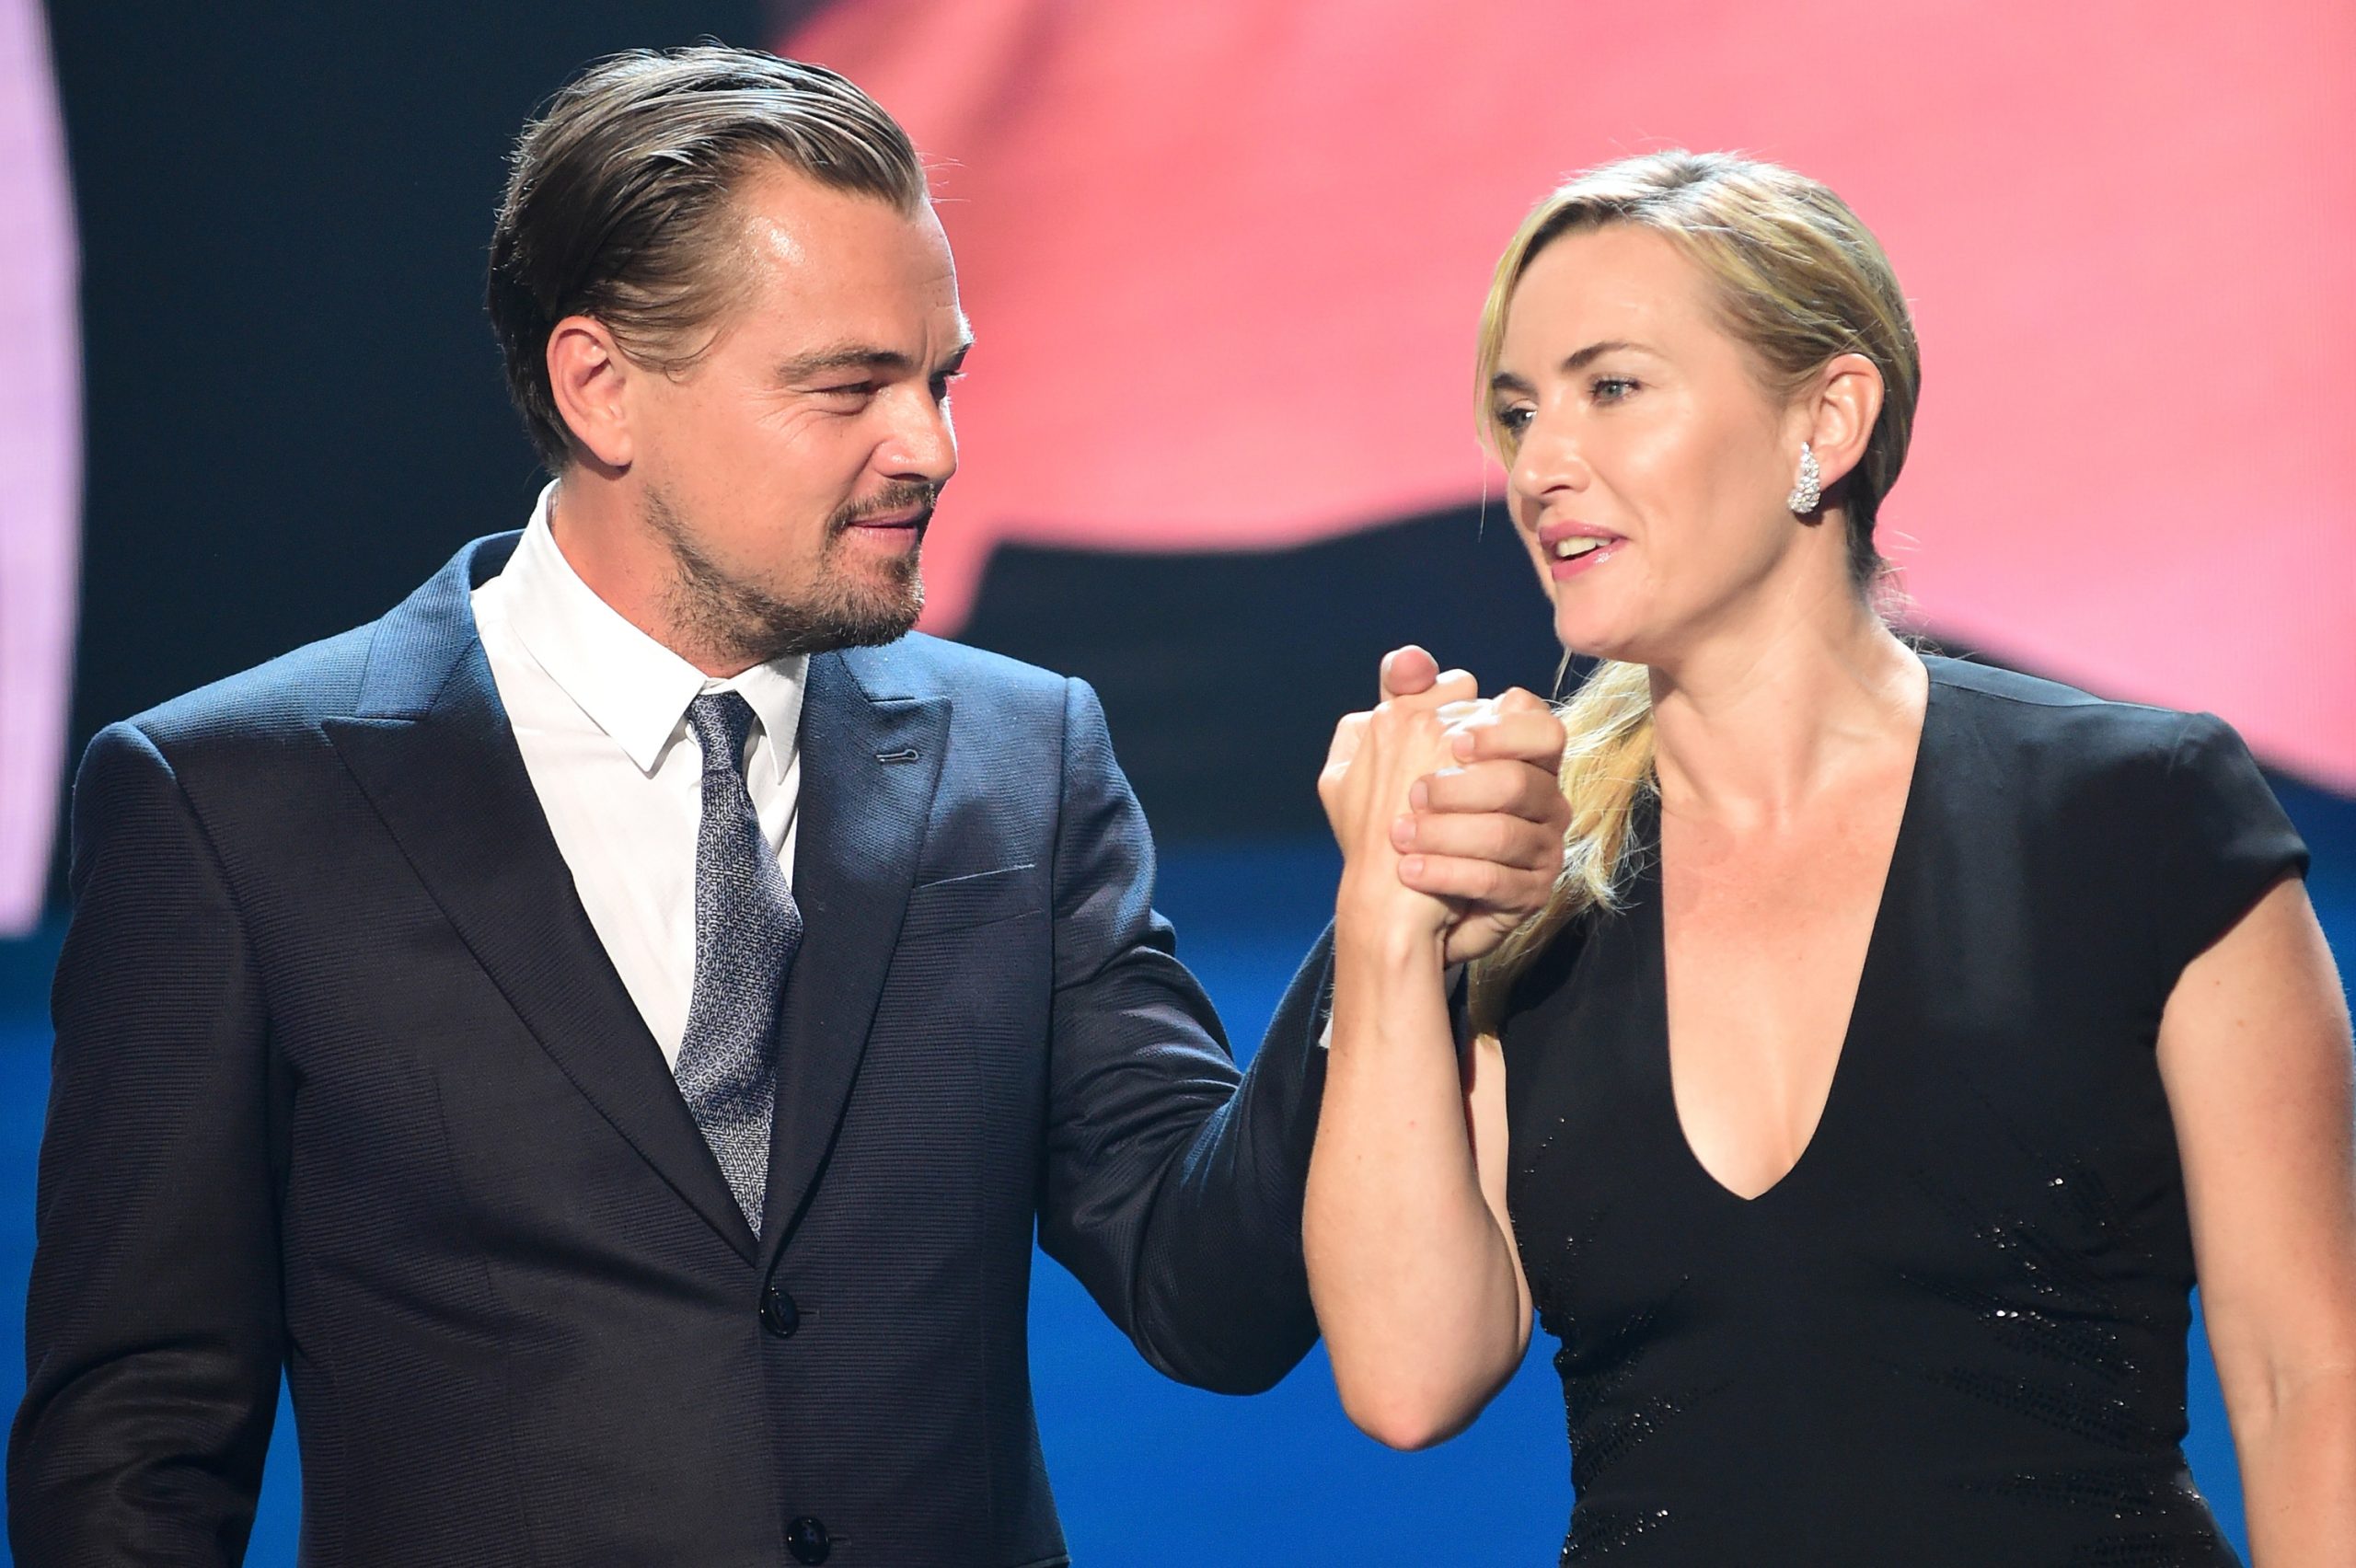 Kate Winslet Called Titanic Co Star Leonardo Dicaprio The Love Of My Life And The Feeling Is Mutual Sahiwal Edward abel smith aka ned rocknroll is the current husband of the academy award winning actress kate winslet. kate winslet called titanic co star